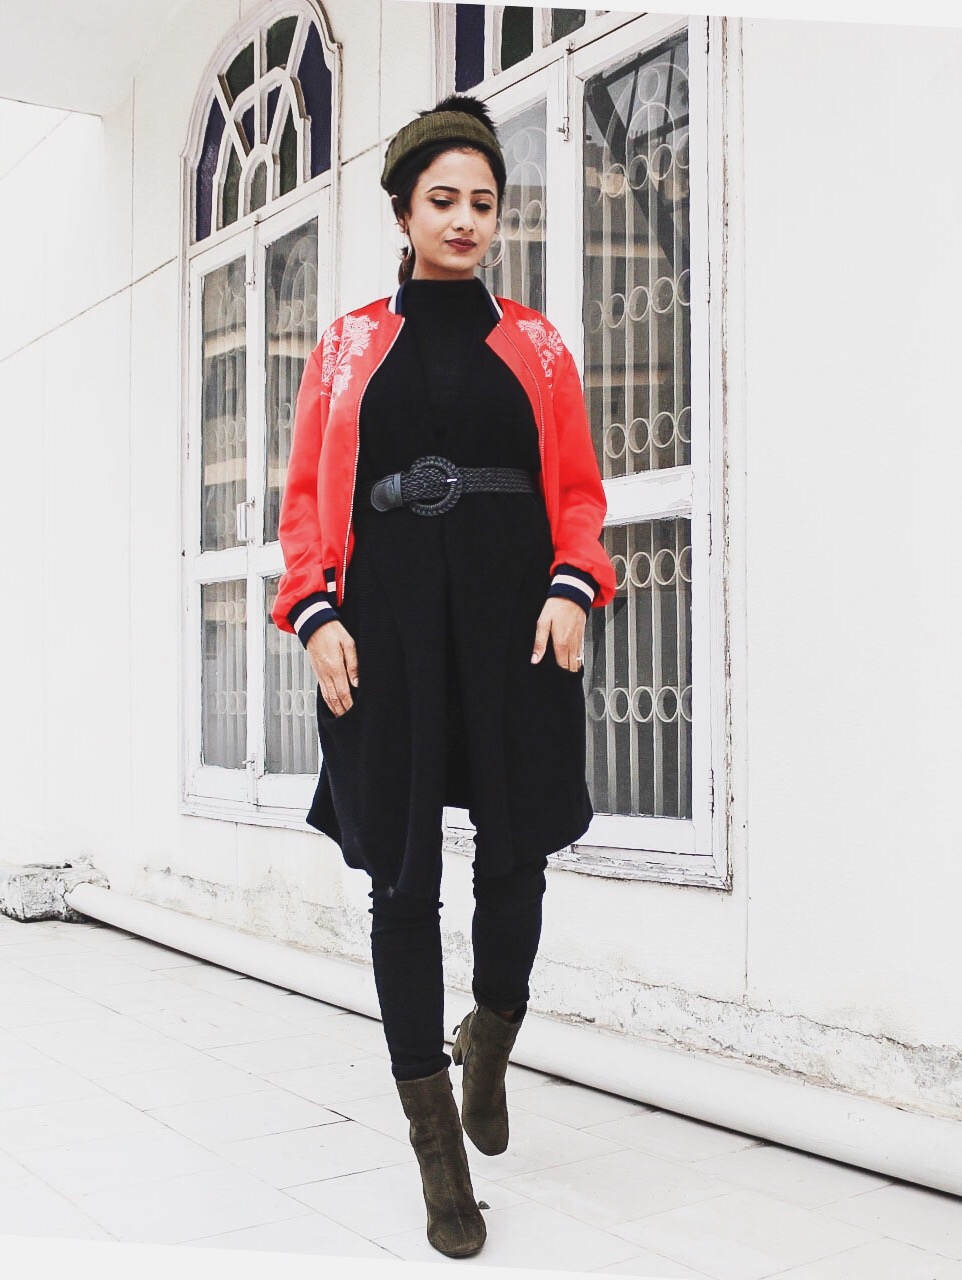 timeless classic, how to make a timeless classic look fresh, classic outfit, red bomber jacket, style bomber jacket, modern classic, colours with black, sock boots, ankle sock boots, khaki ankle boots, style beanie, beanie outfit, belting, top indian blog, uk blog, london blog, indian luxury blog, indian style guru, style ankle boots, quiz clothing, quiz clothing review, quiz clothing shoes, parisian chic, parisian look, effortless chic, top street style, blogger outfit, 2016 top street style, london street style, uk street style, indian street style, winter fashion, 2016 winter style, wear a vest, wear a gillet, black outfit ideas, bright in winter, 